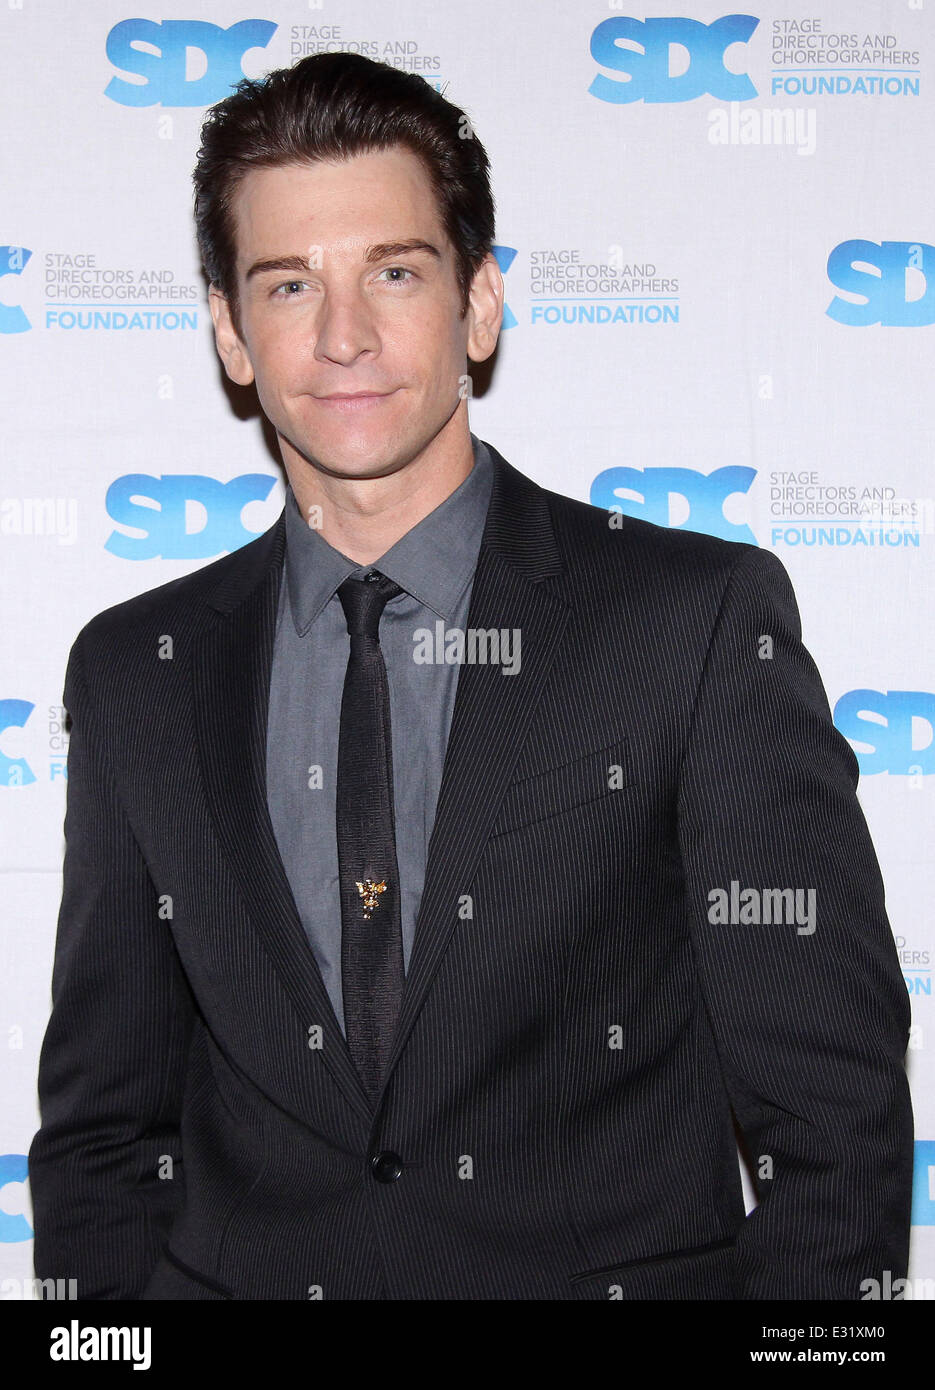 Stage Directors and Choreographers Foundation (SDCF) Gala honoring director-choreographer Jerry Mitchell held at B.B. Kings - Arrivals  Featuring: Andy Karl Where: New York City, NY, United States When: 13 May 2013 Stock Photo